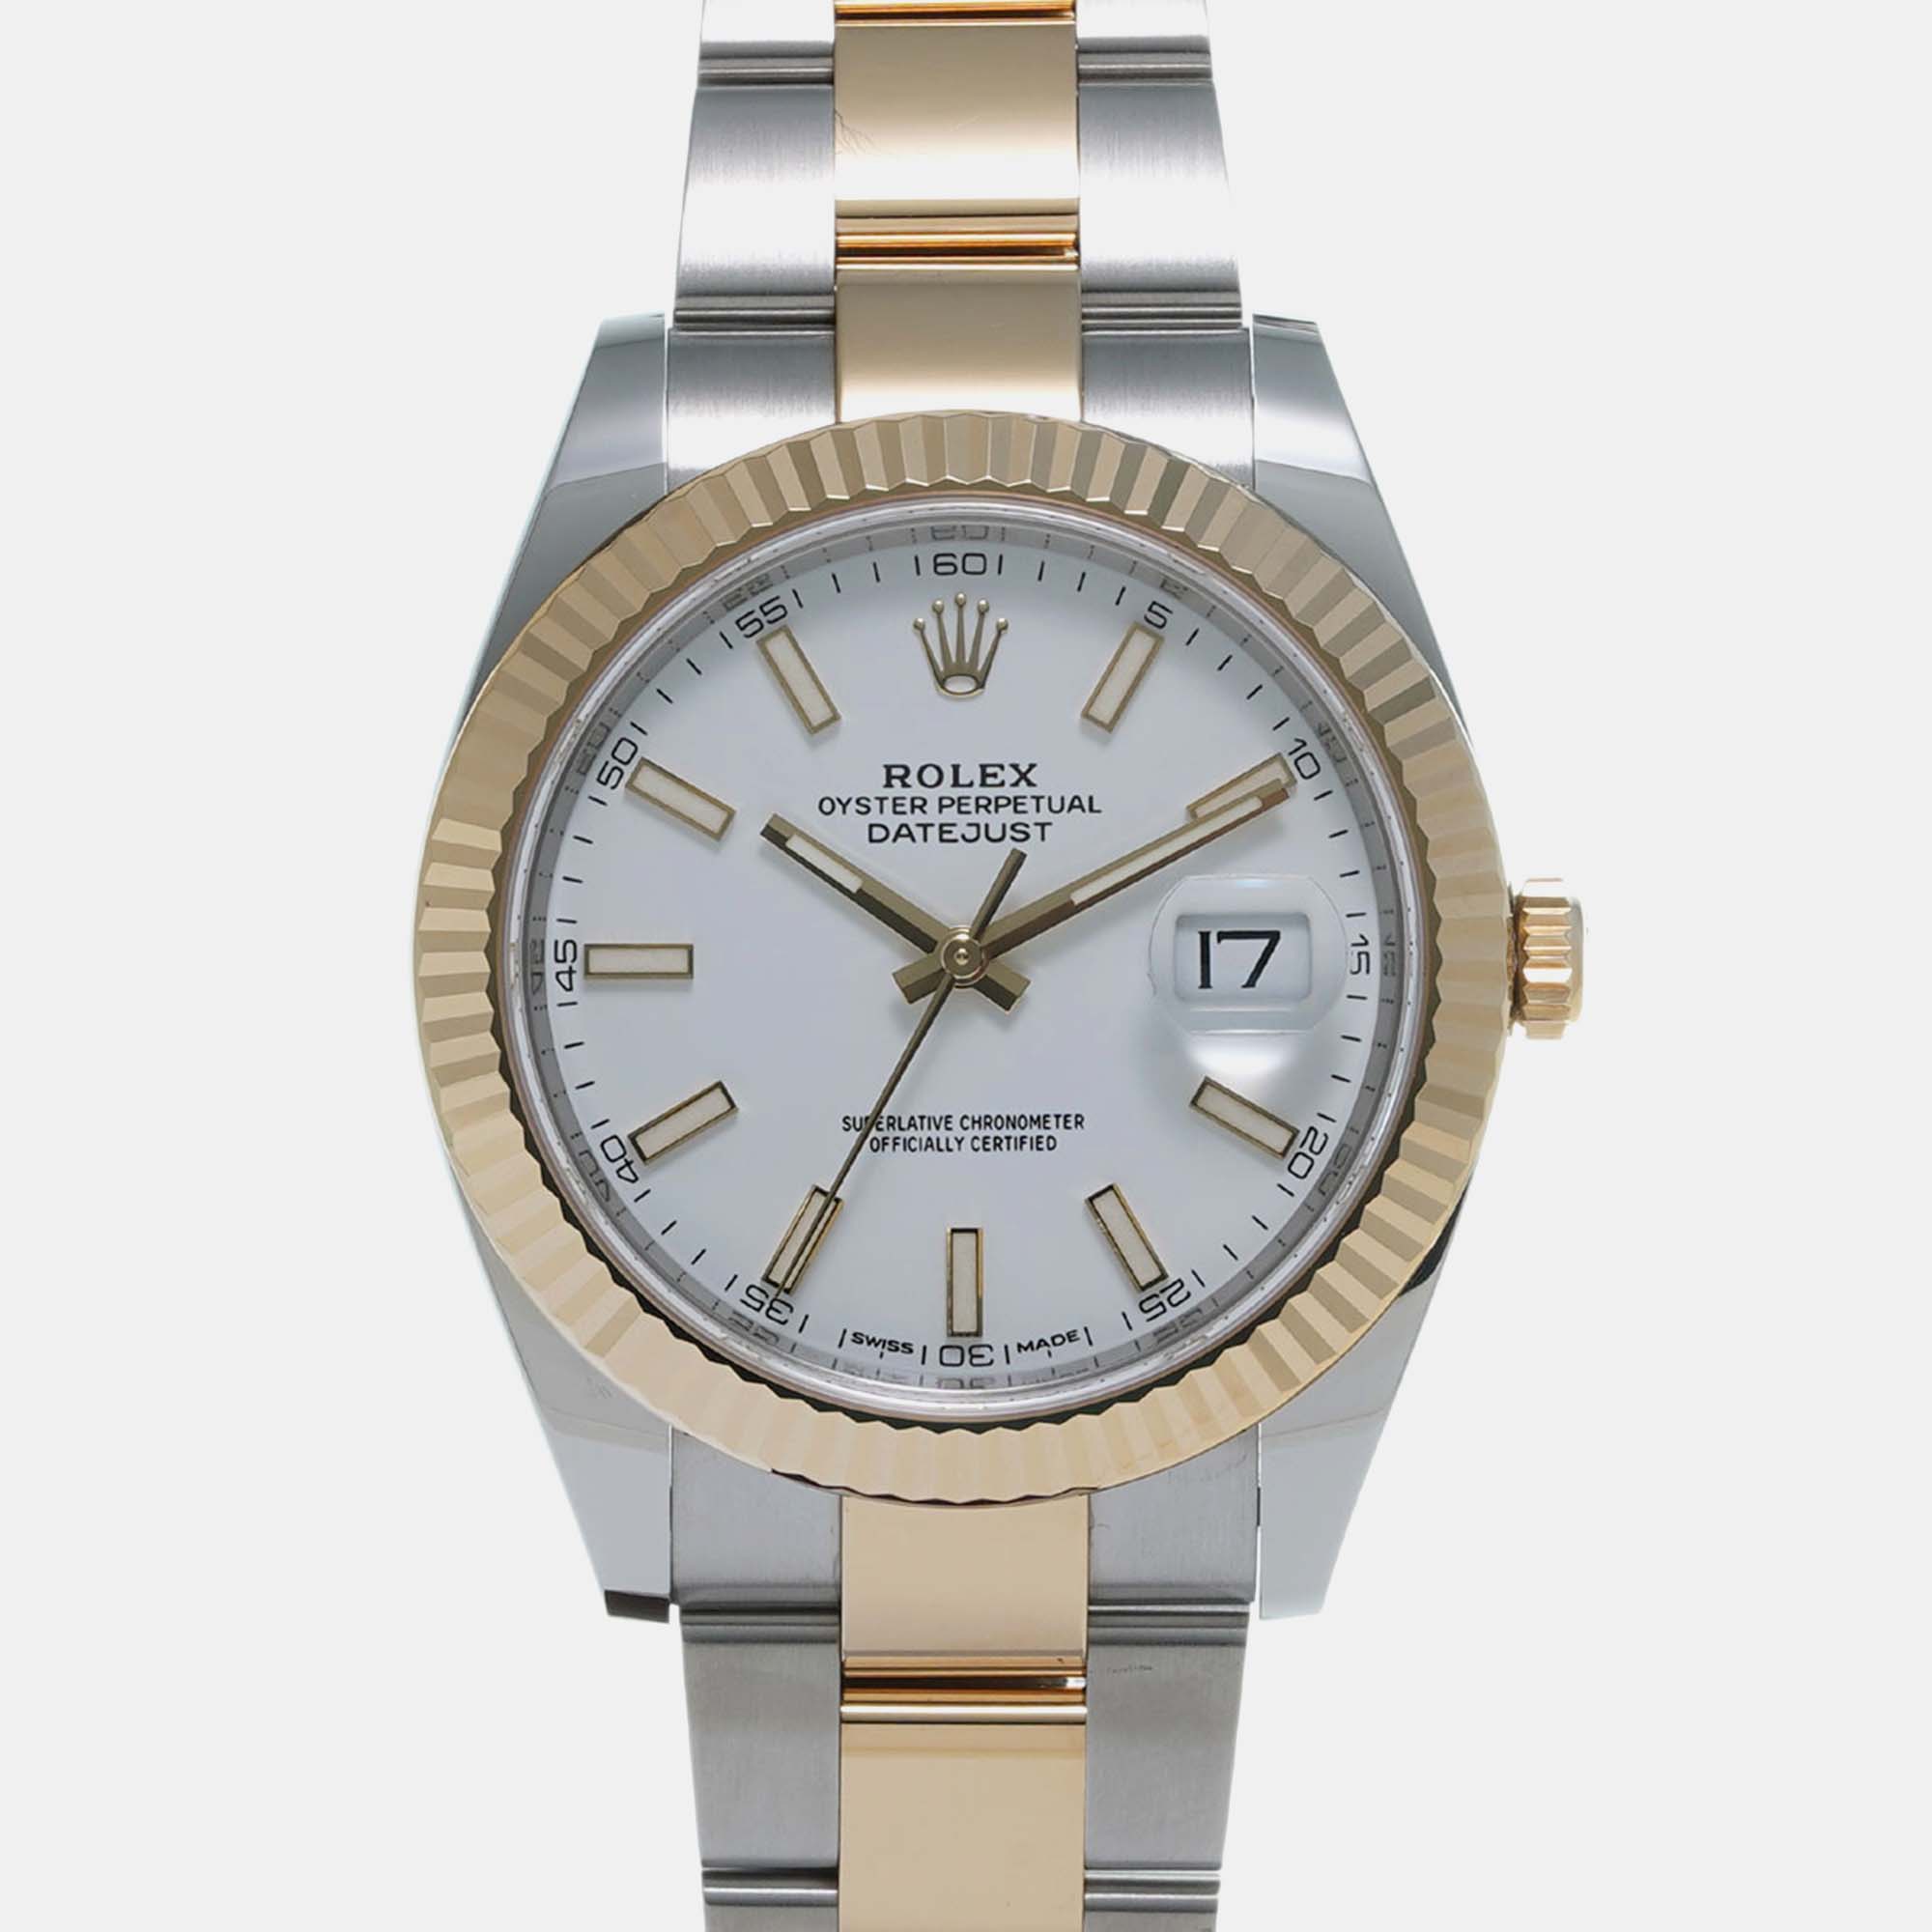 Rolex white 18k yellow gold stainless steel datejust 126333 automatic men's wristwatch 41 mm